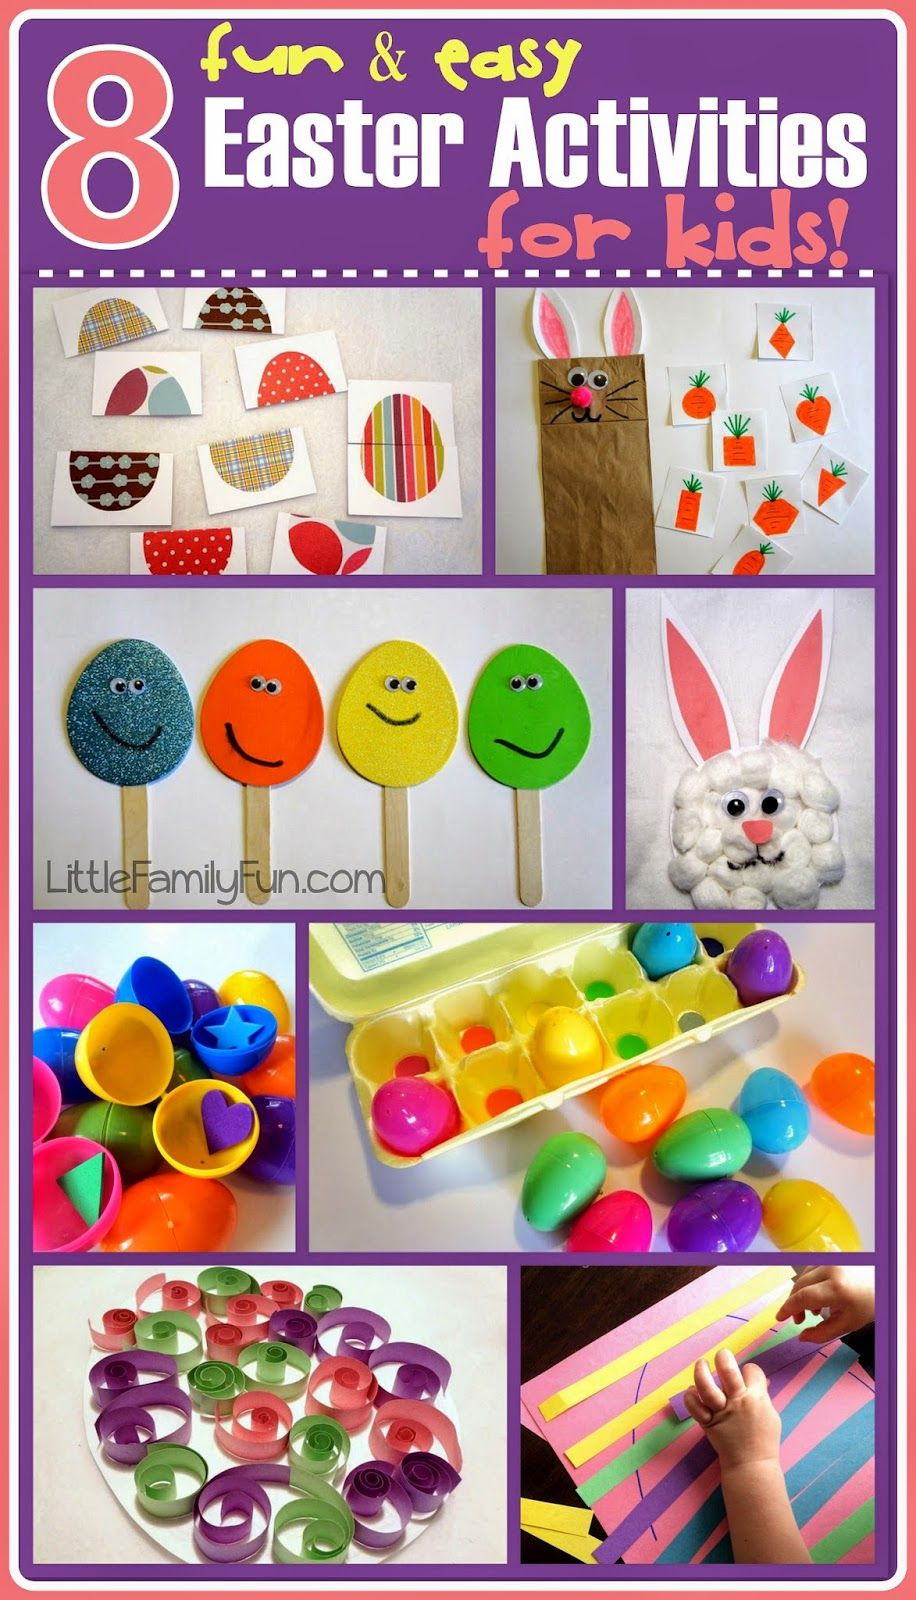 Fun Easy Activities For Kids
 FUN & EASY Easter crafts & activities for kids Cute ideas